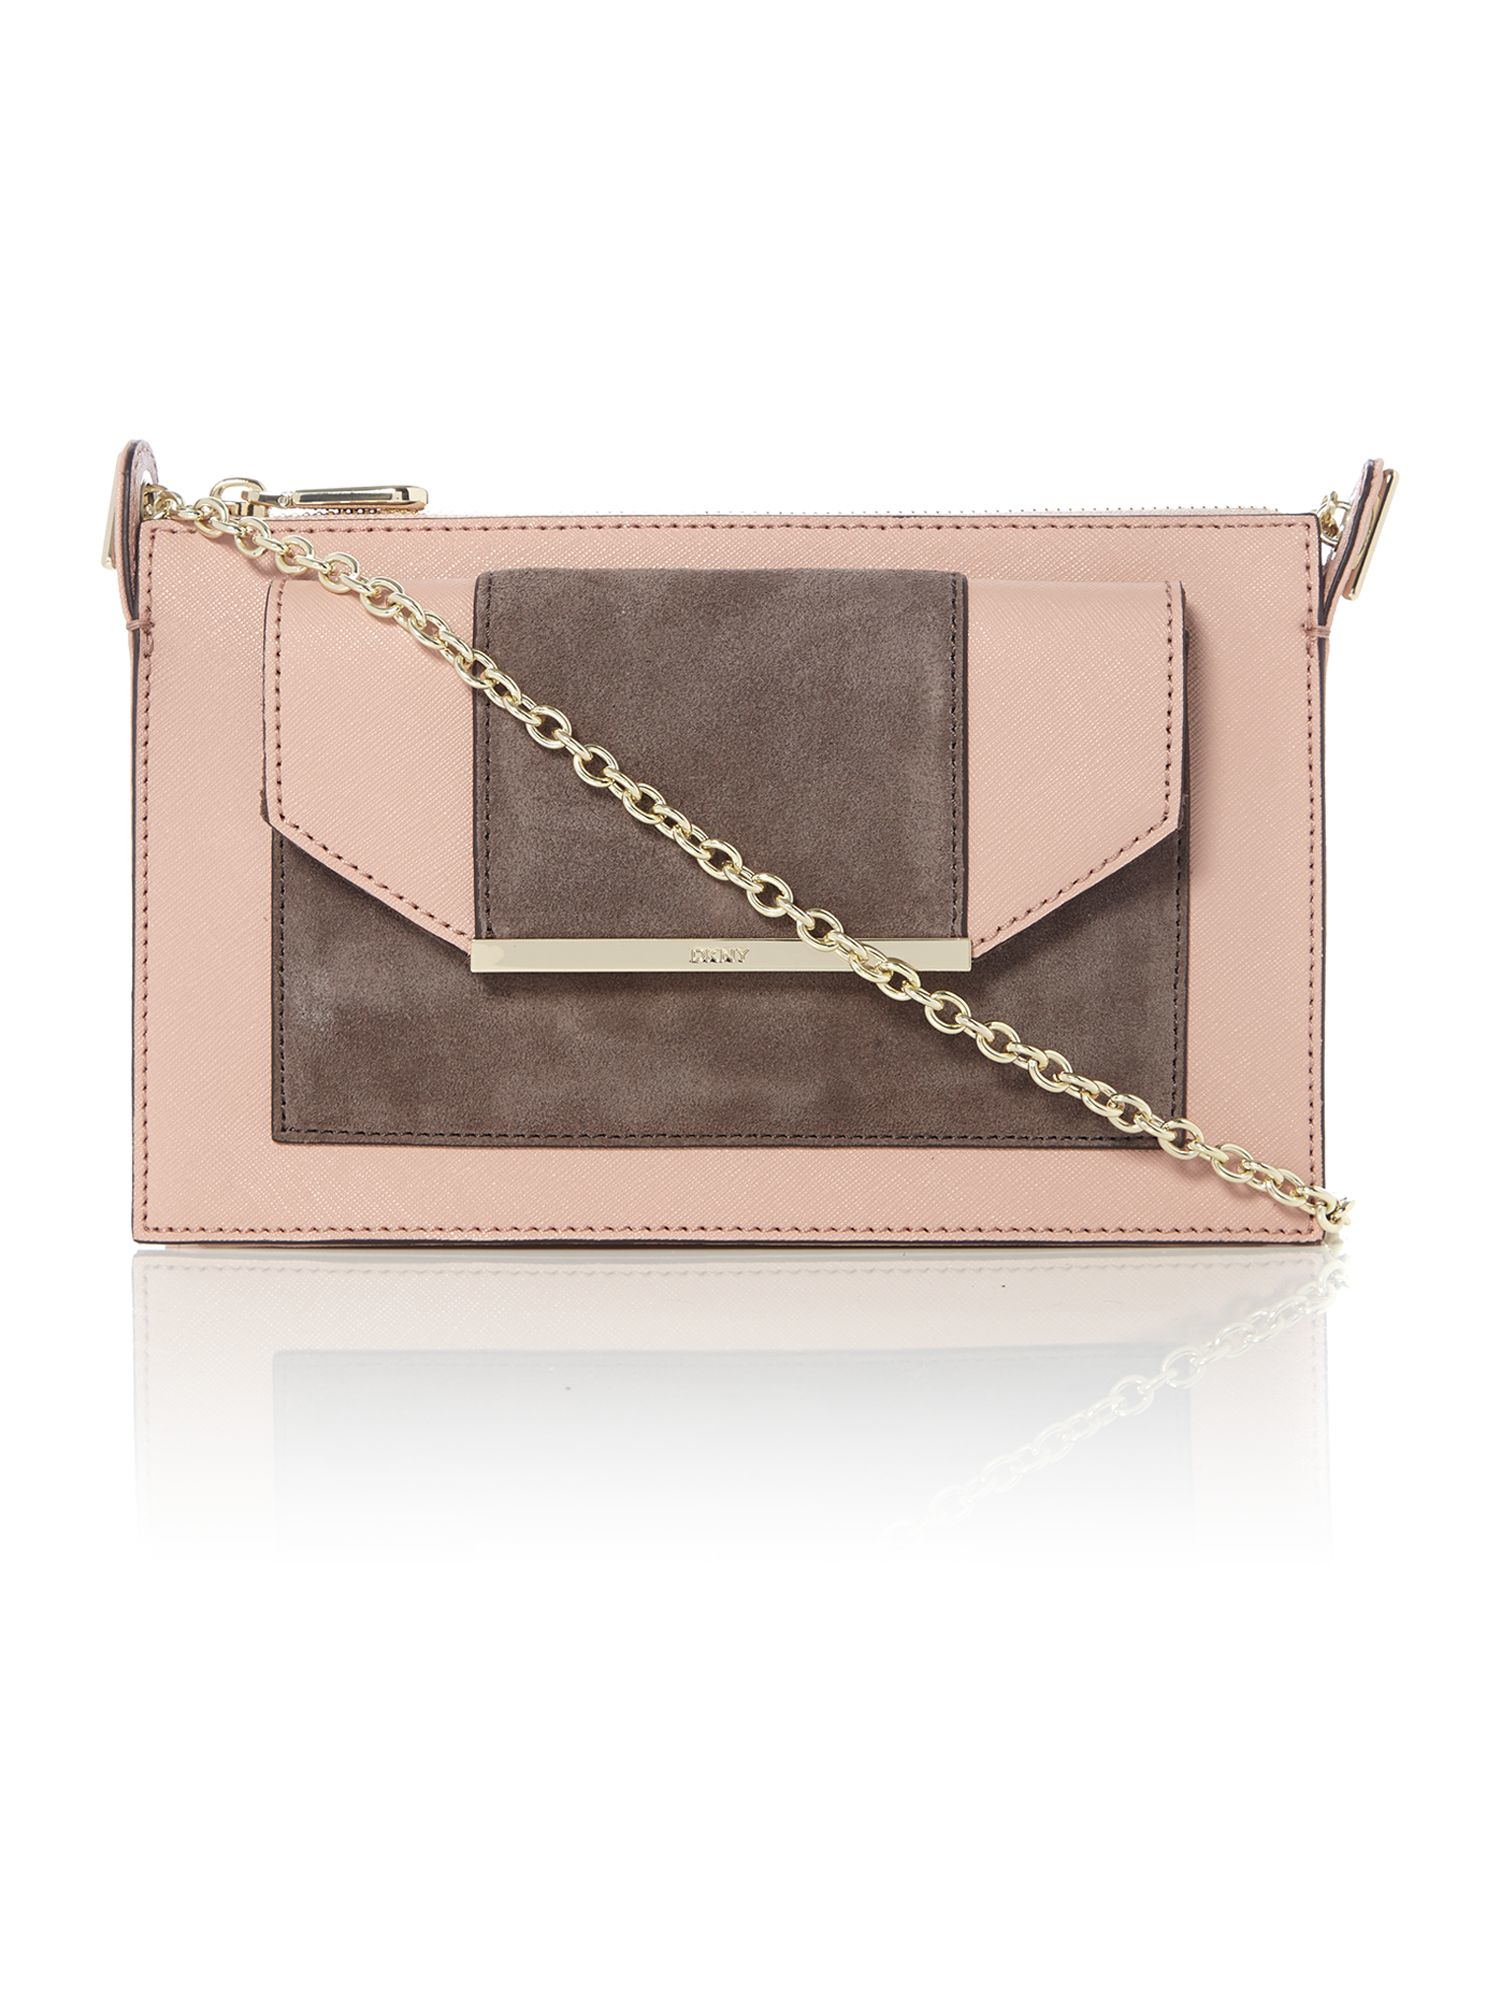 Dkny Saffiano Suede Light Pink Small Cross Body Bag in Beige (Light%20Pink) | Lyst